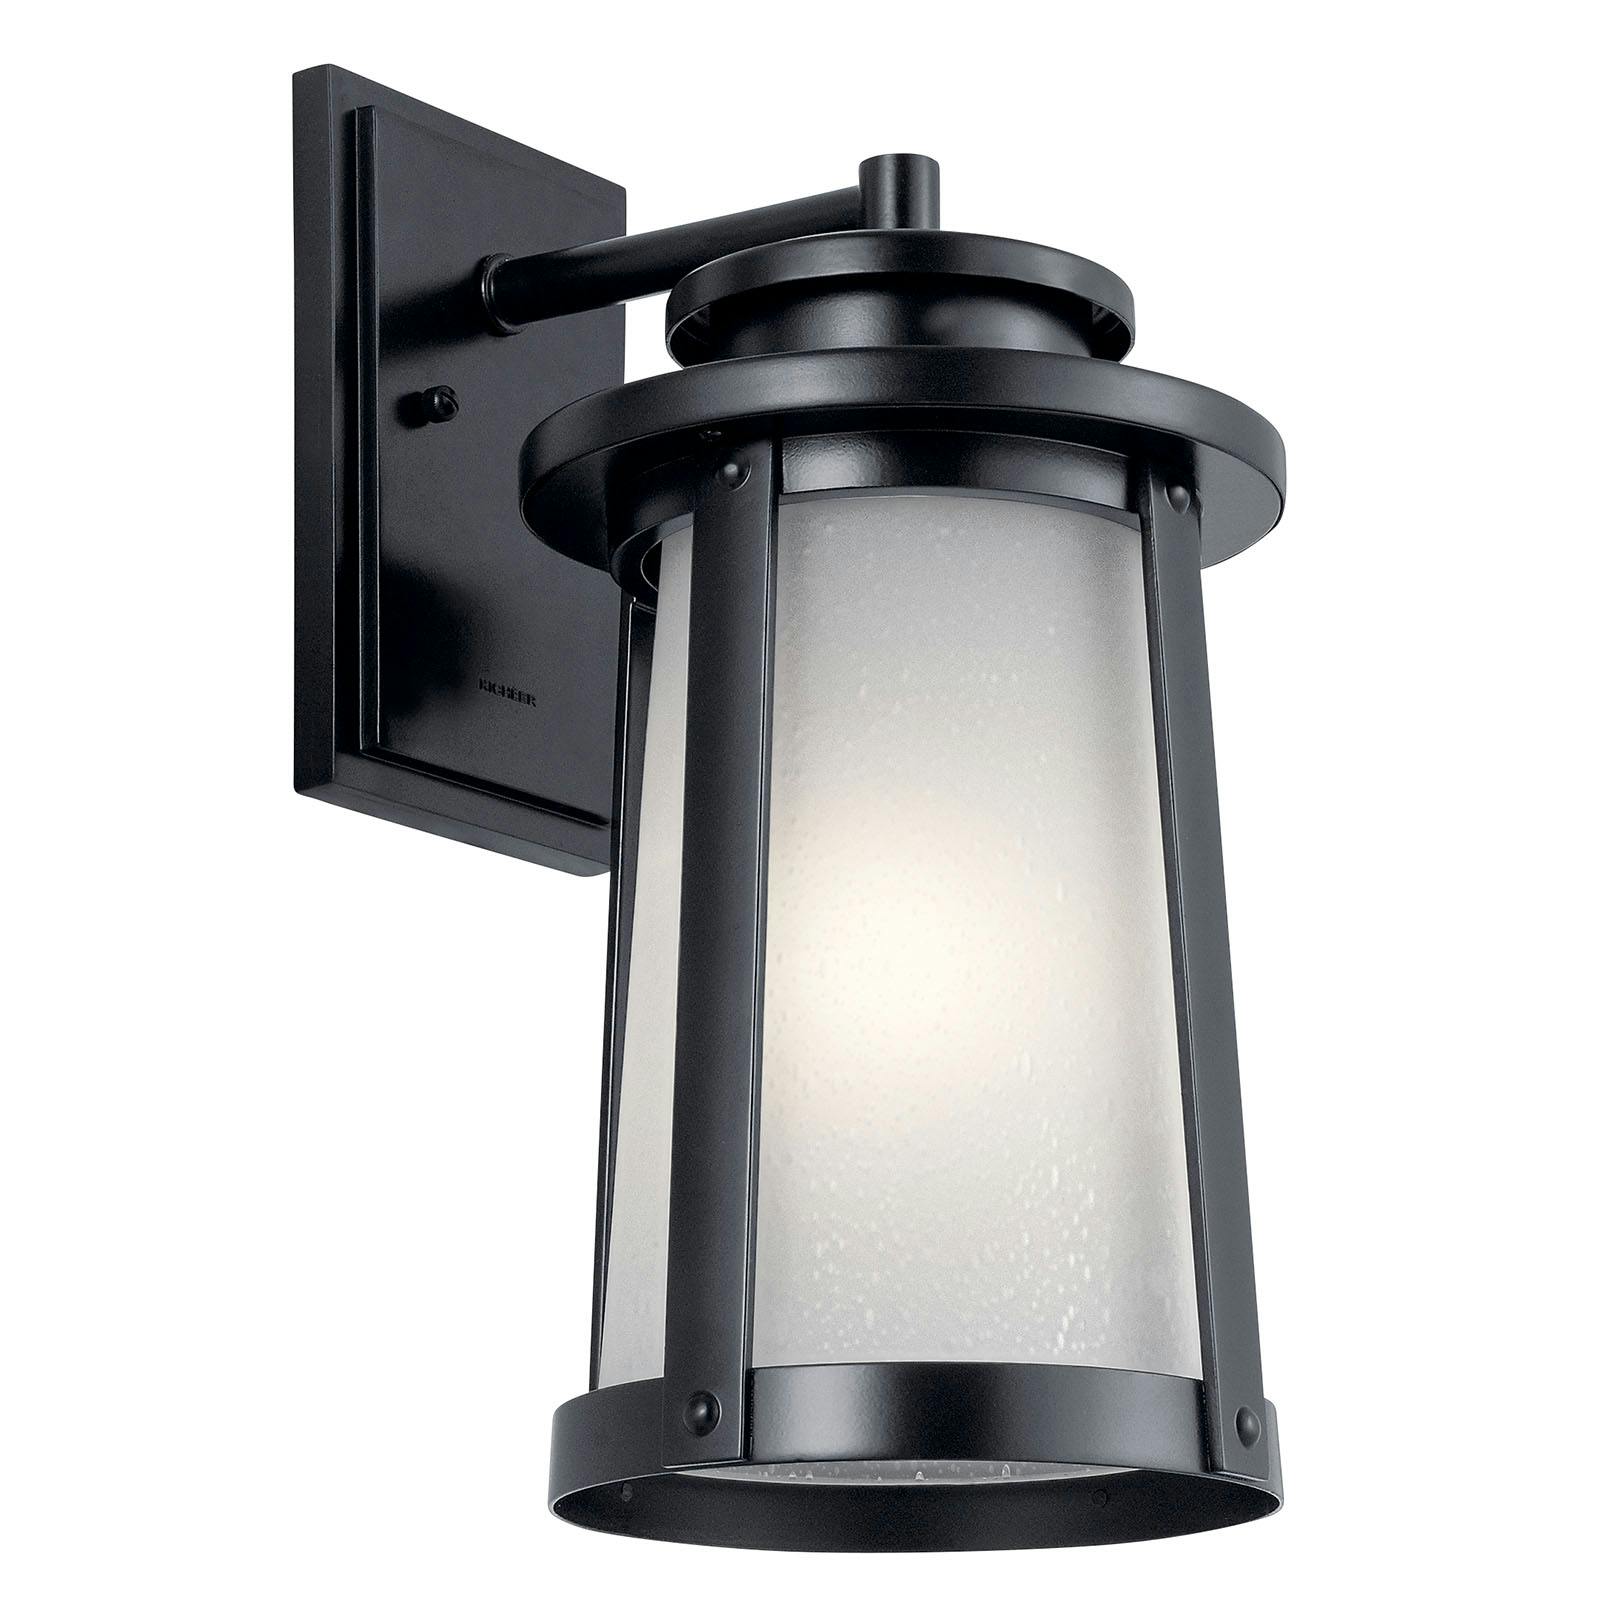 Harbor Bay 15.75" Wall Light Black on a white background